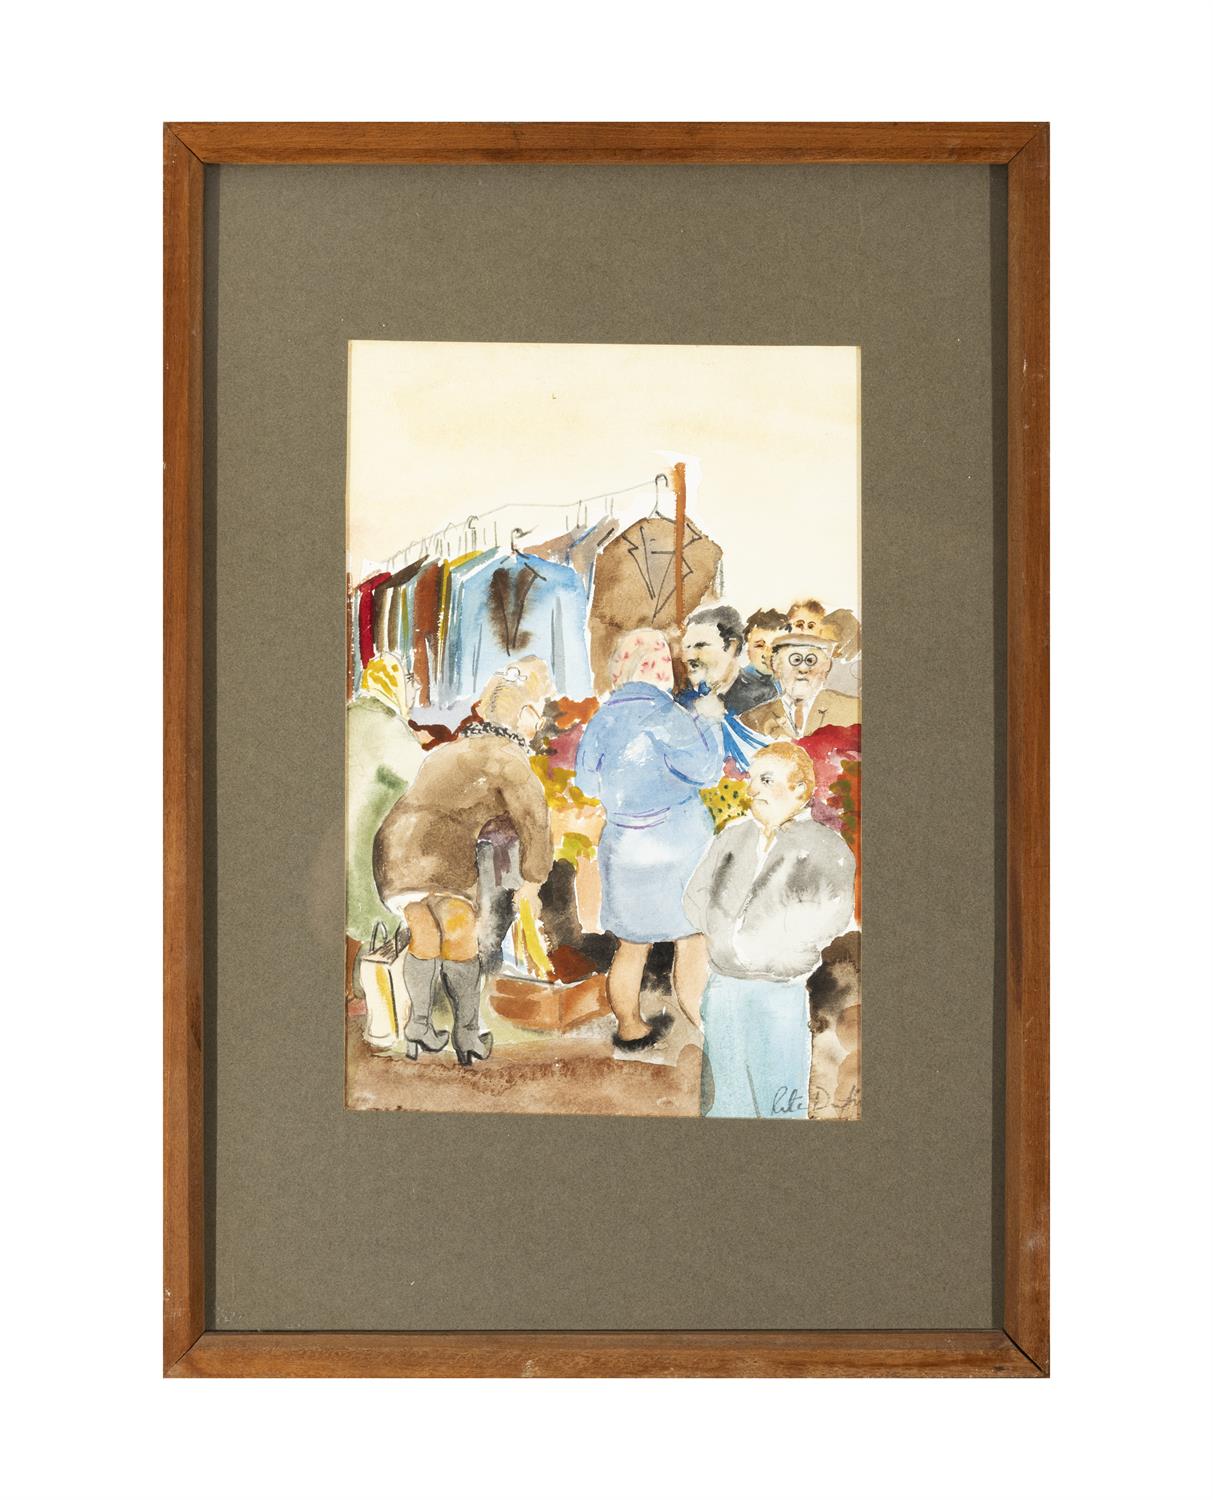 RITA DUFFY Market Day - Clothes Stall Pencil and watercolour, 35 x 23cm Signed - Image 2 of 4